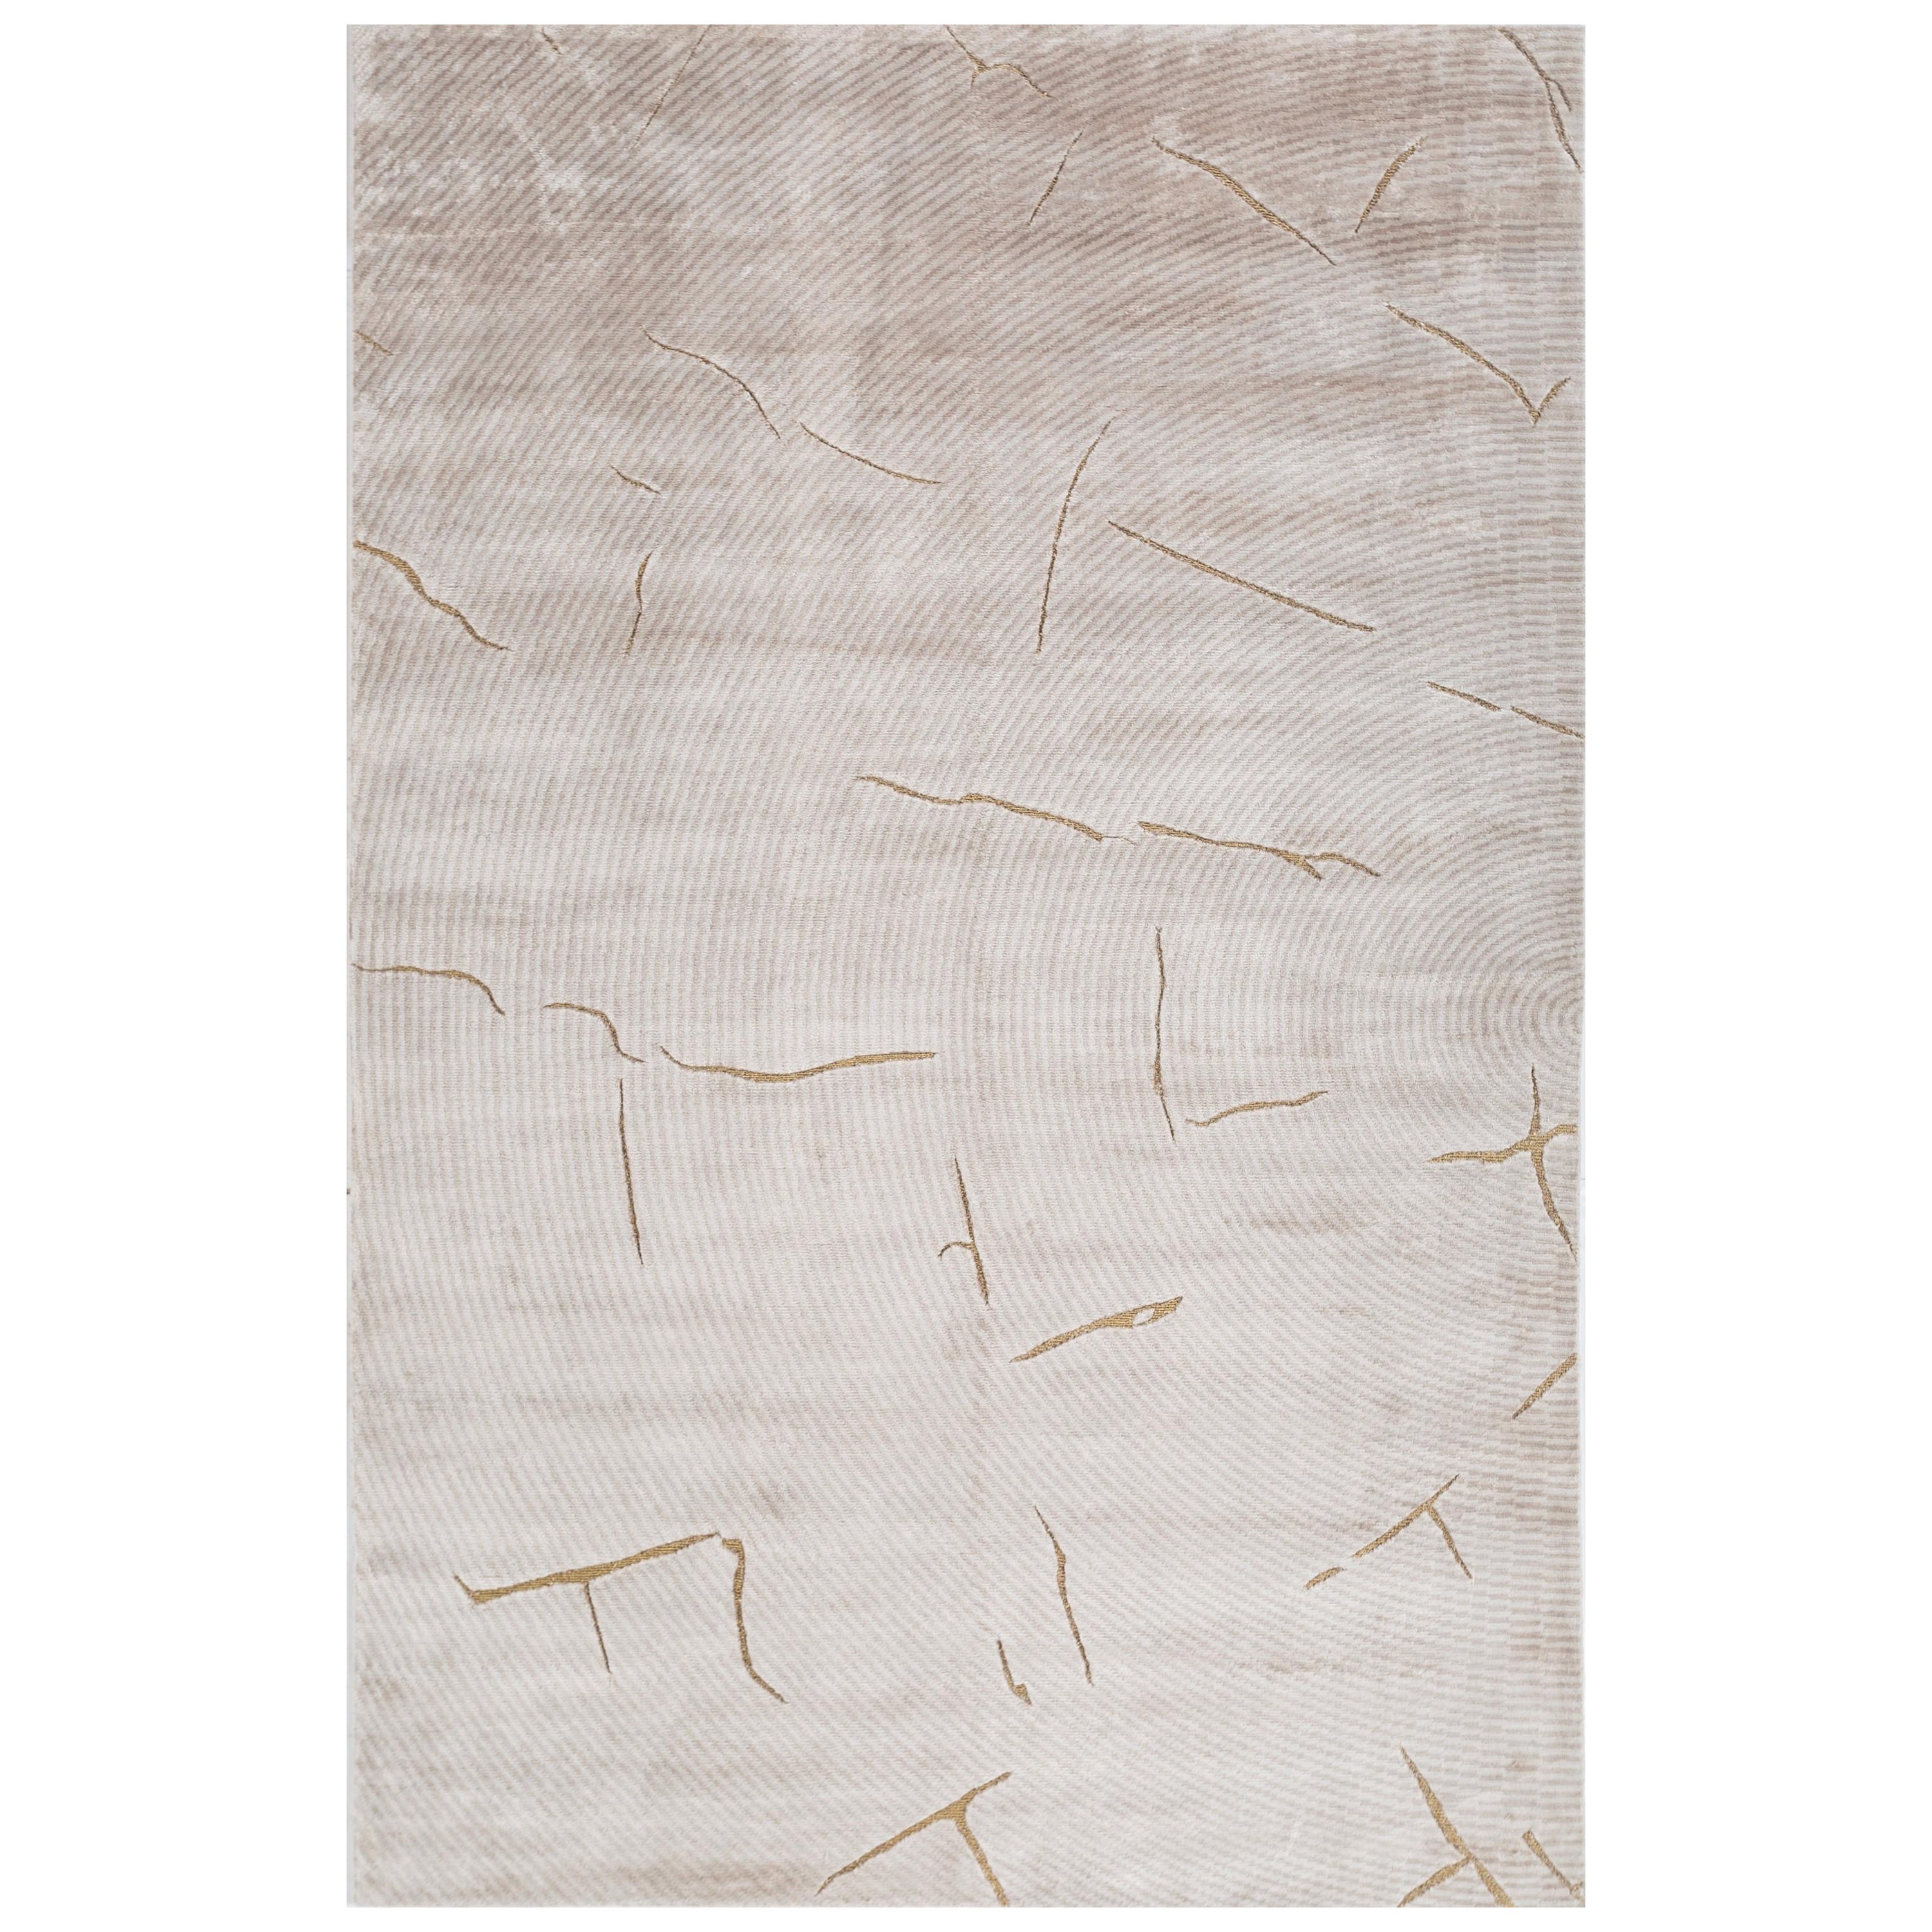 Luminous Mosaic White Sand Marble 180X270 cm Hand-Knotted Rug